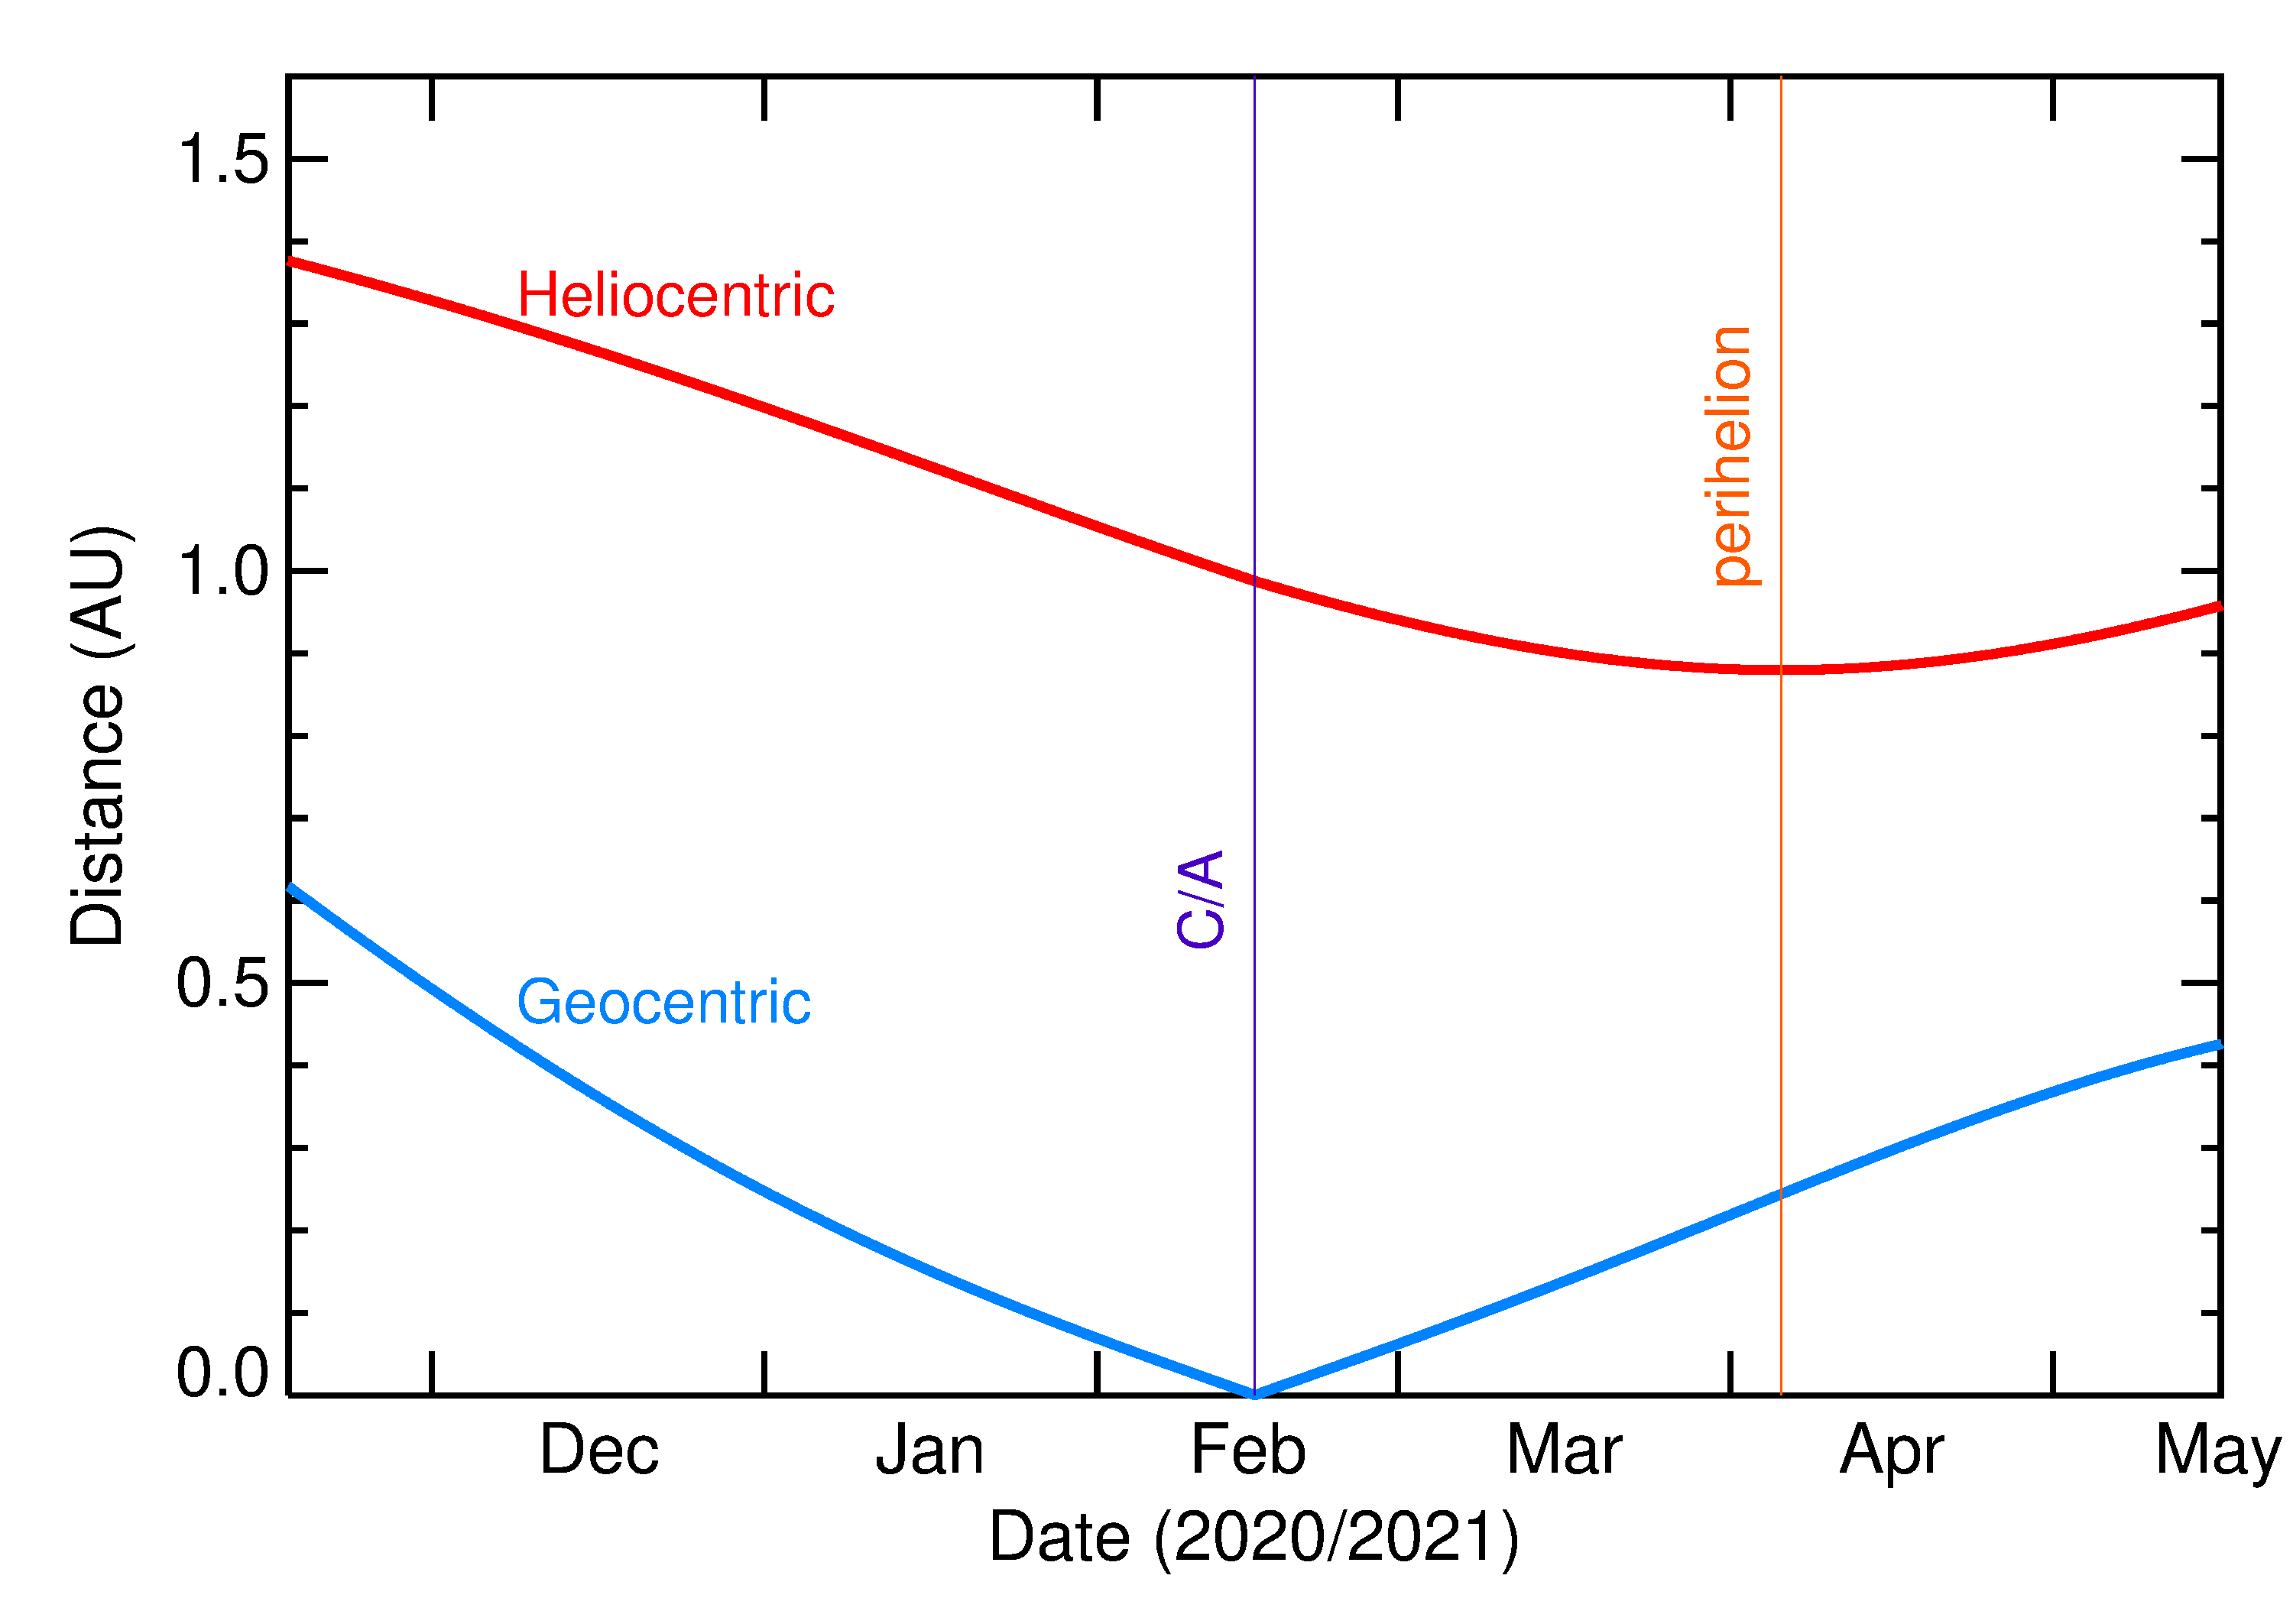 Heliocentric and Geocentric Distances of 2021 CW7 in the months around closest approach